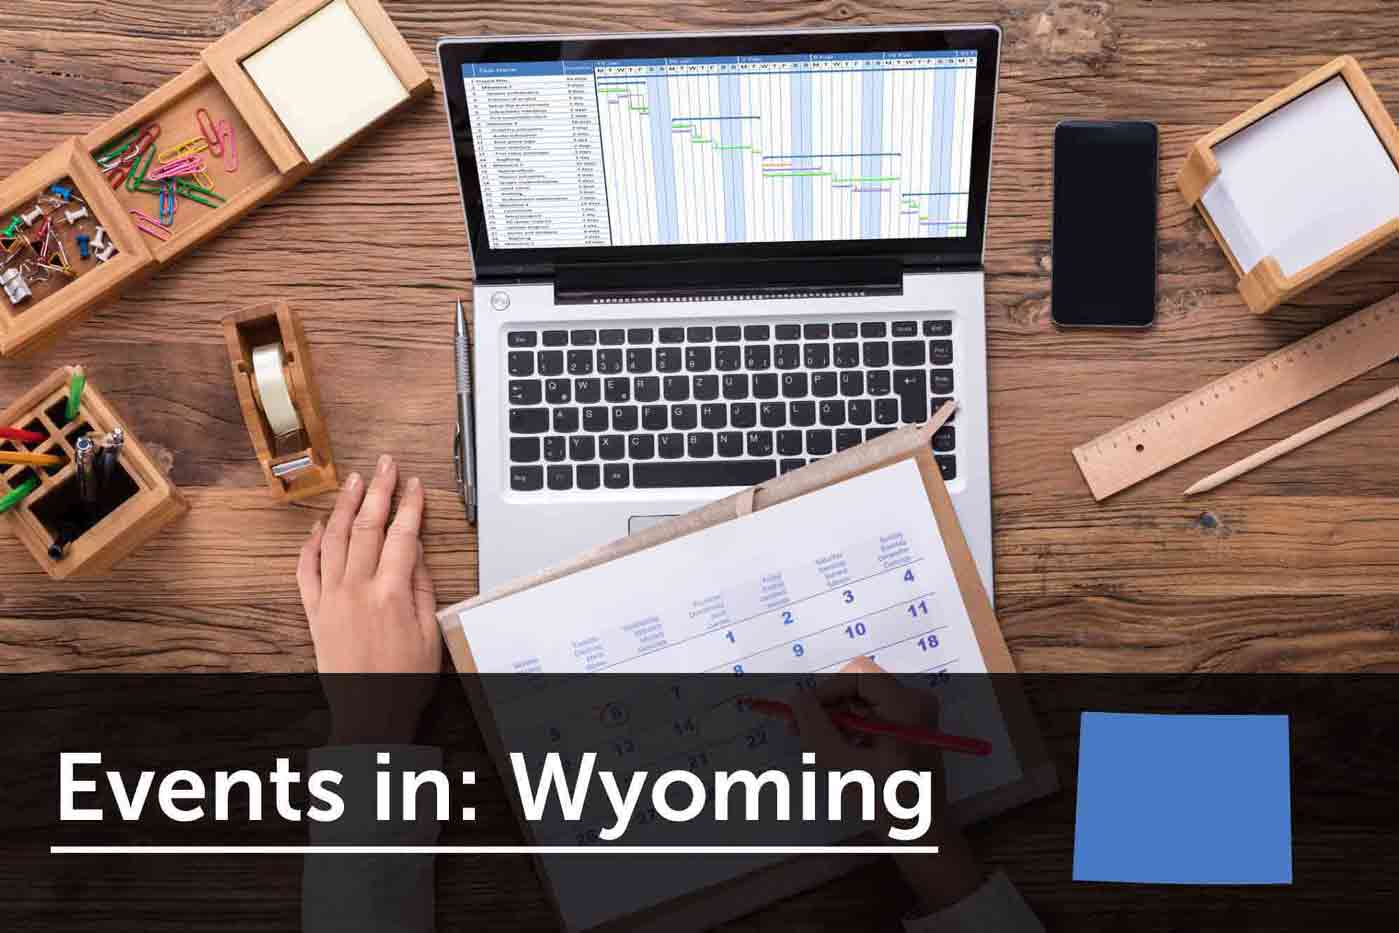 Women's business events in Wyoming